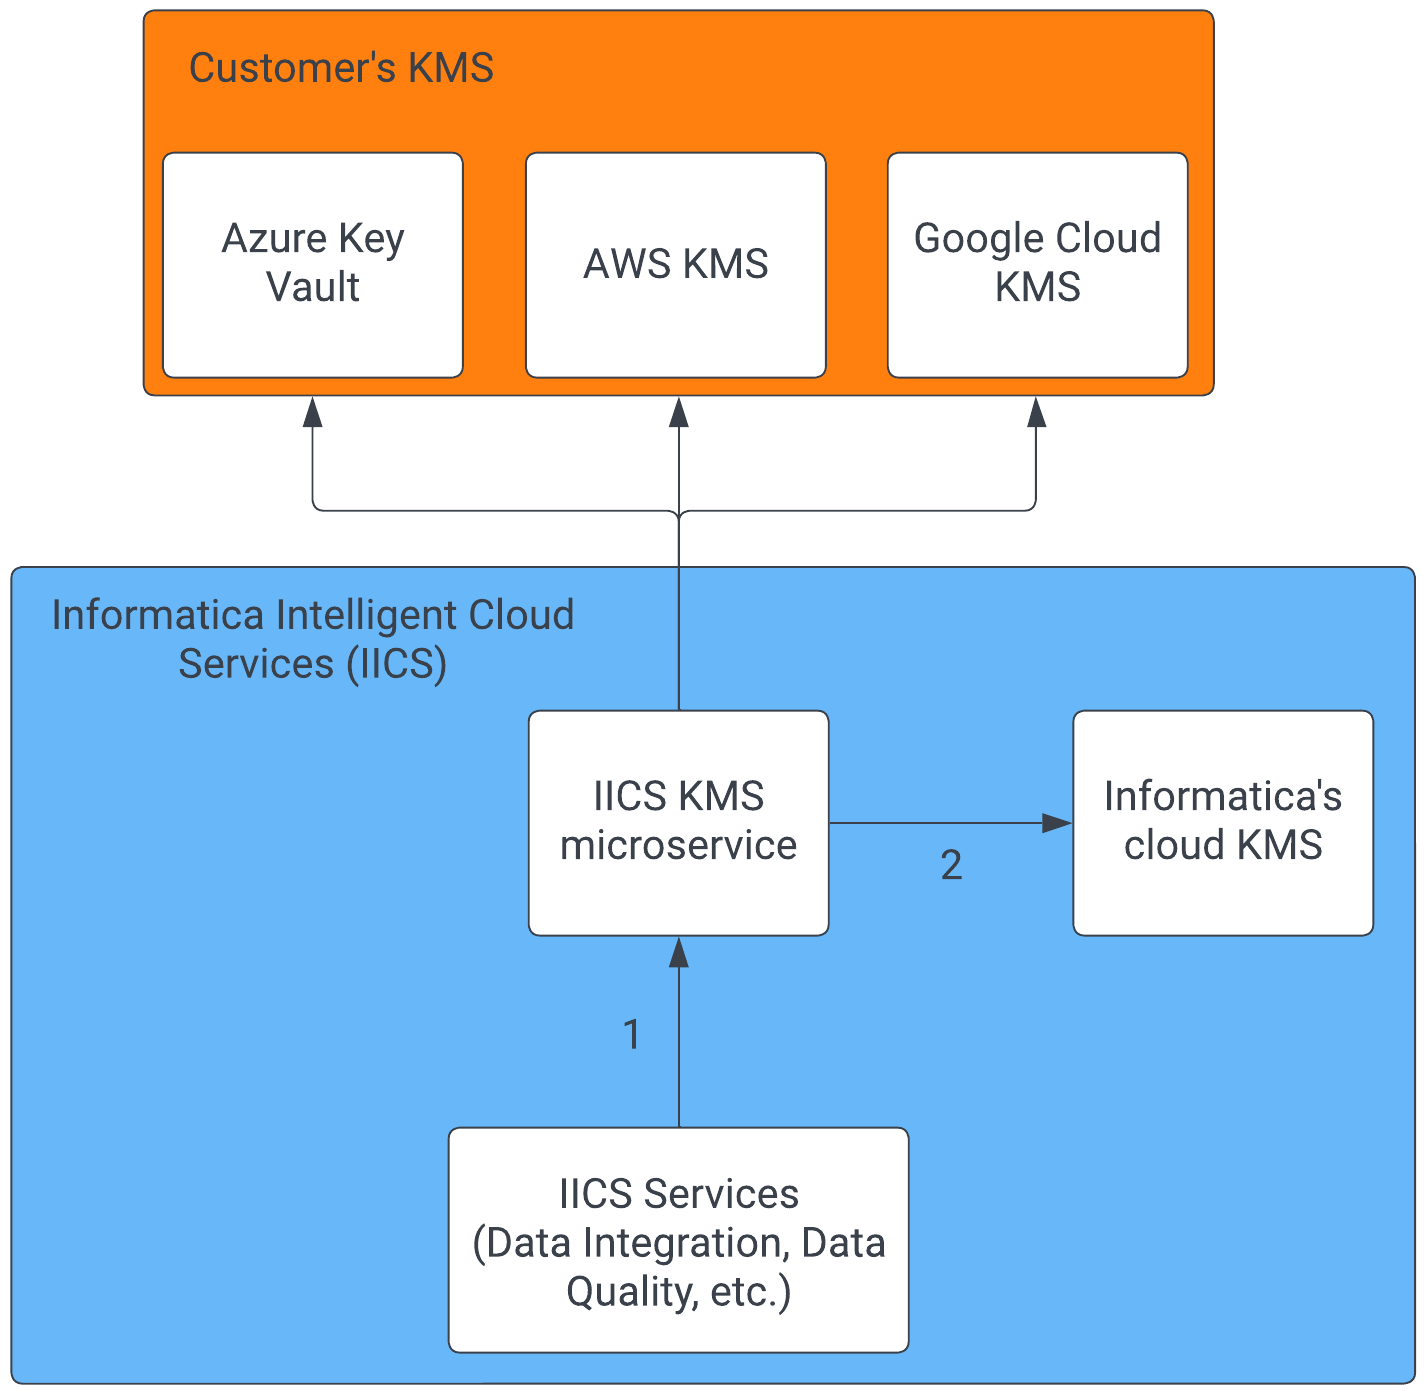  Informatica Intelligent Cloud Services interfaces with its KMS agnostically. Non-customer managed keys go to Informatica's cloud KMS. Customer managed keys go to the customer's KMS, which can be Azure Key Vault, AWS KMS, or Google Cloud KMS. 
		  